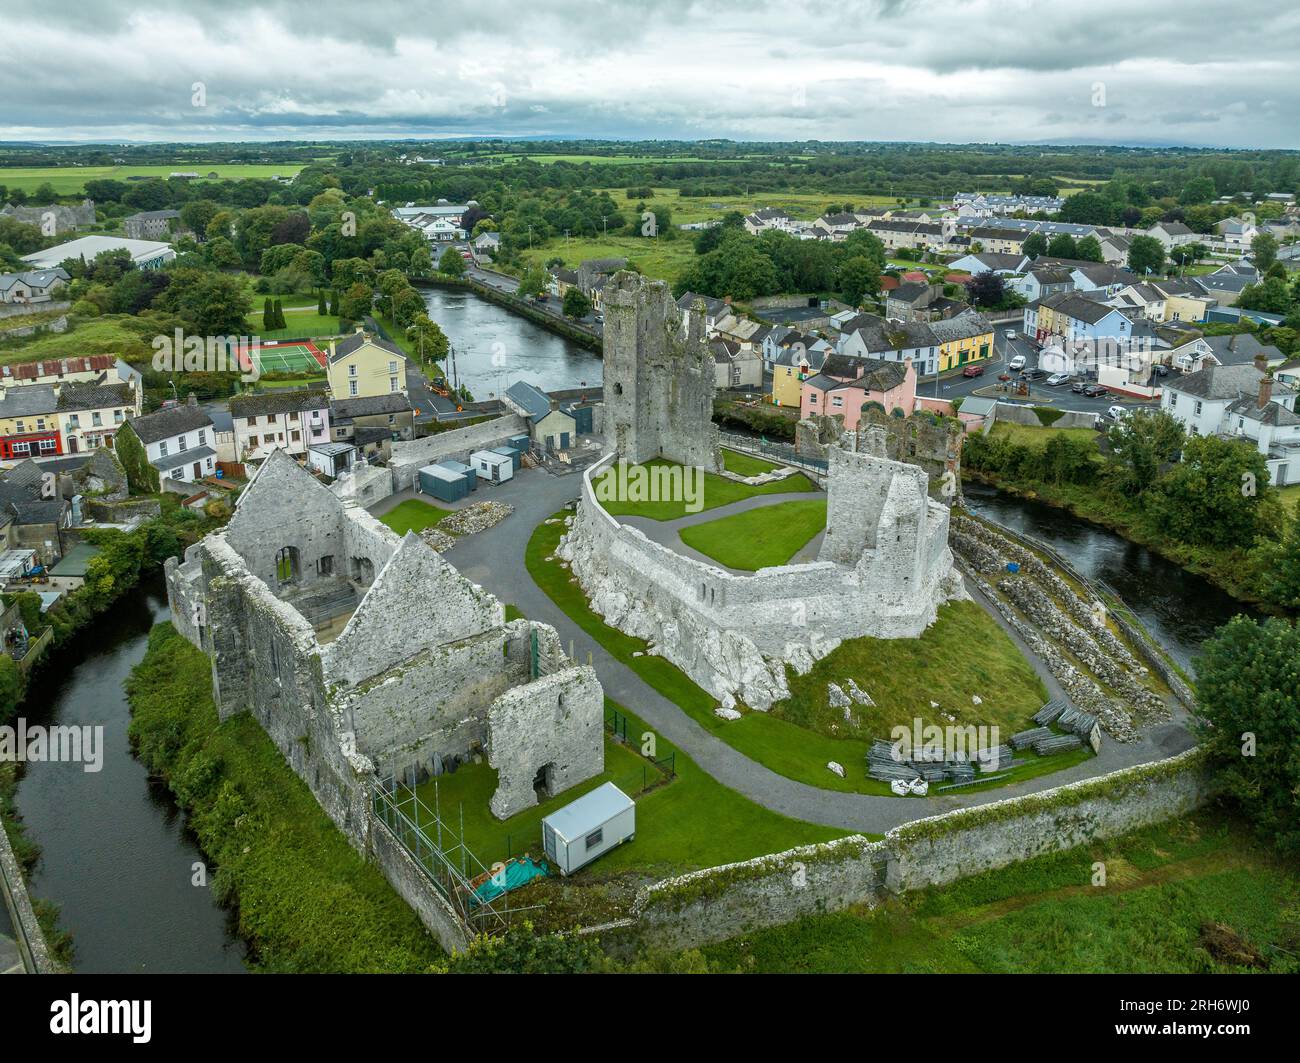 Aerial view of the Desmond castle in Askeaton Ireland in County Limerick on the river Deel, with Gothic Banqueting Hall, finest medieval secular build Stock Photo